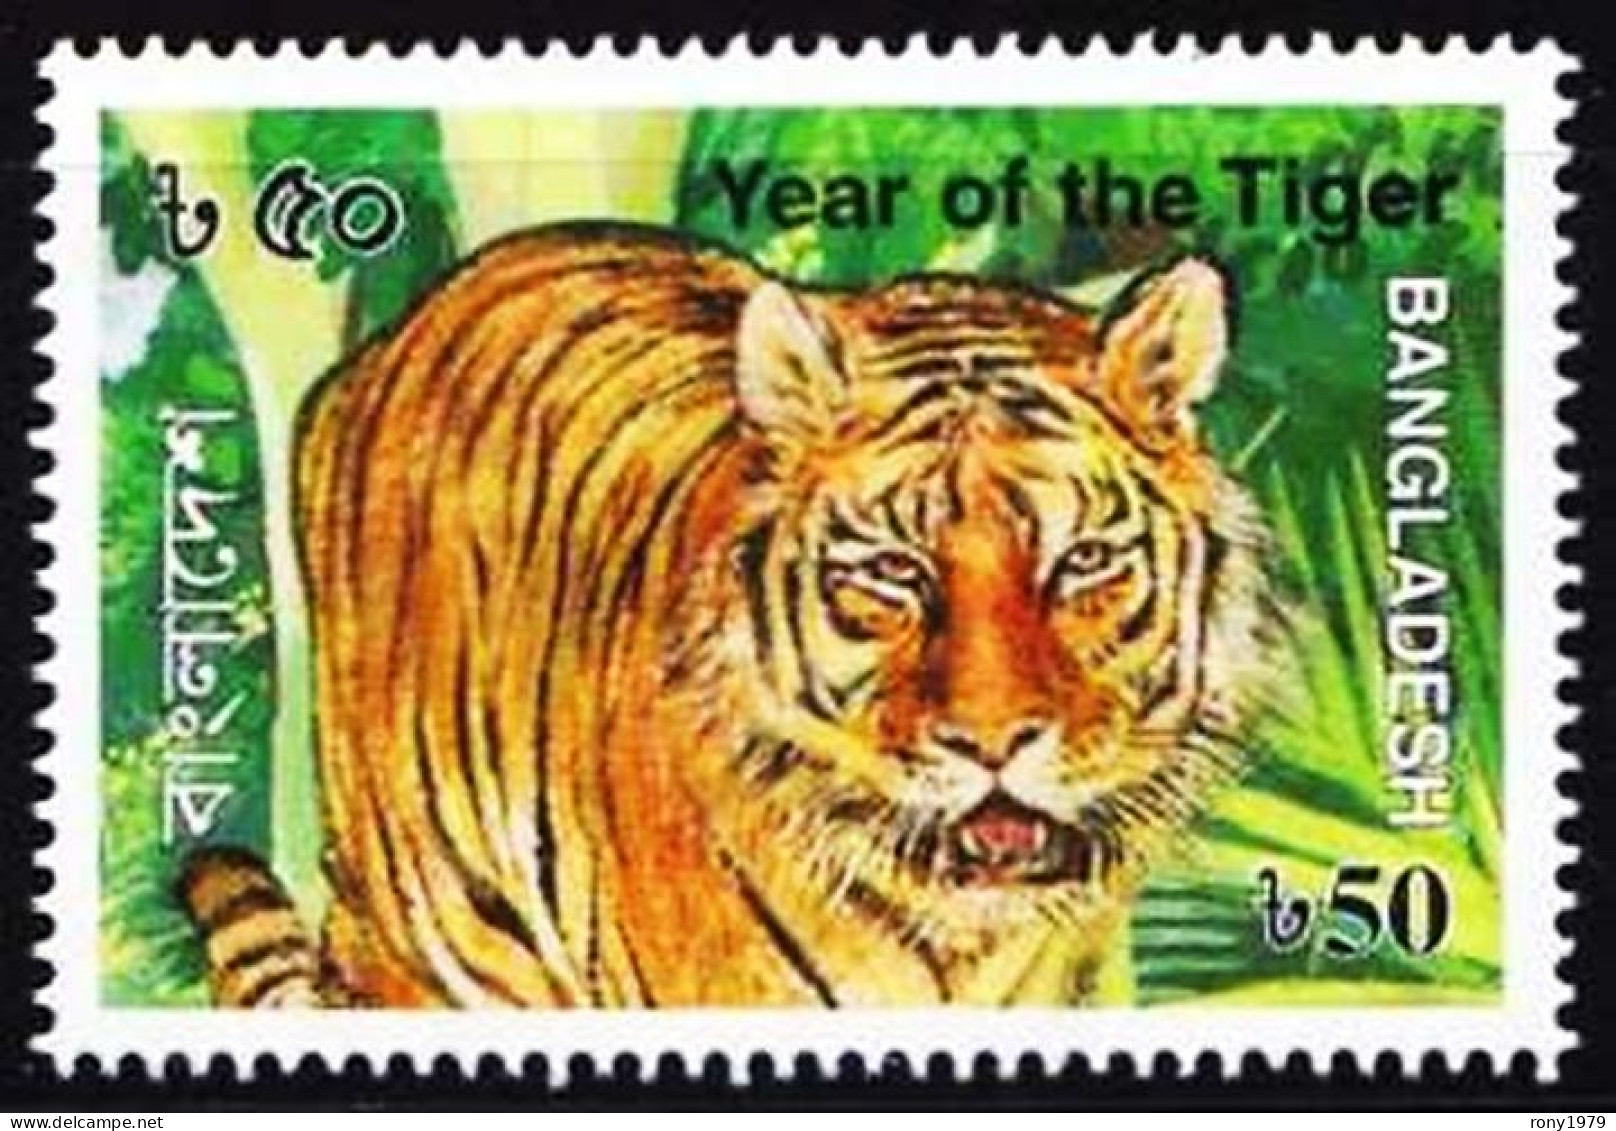 2010 Bangladesh Full Year Set Pack Collection 15 Stamp 8 MS Scout Buddha Cricket Flower Tiger Elephant Bird Women FREE S